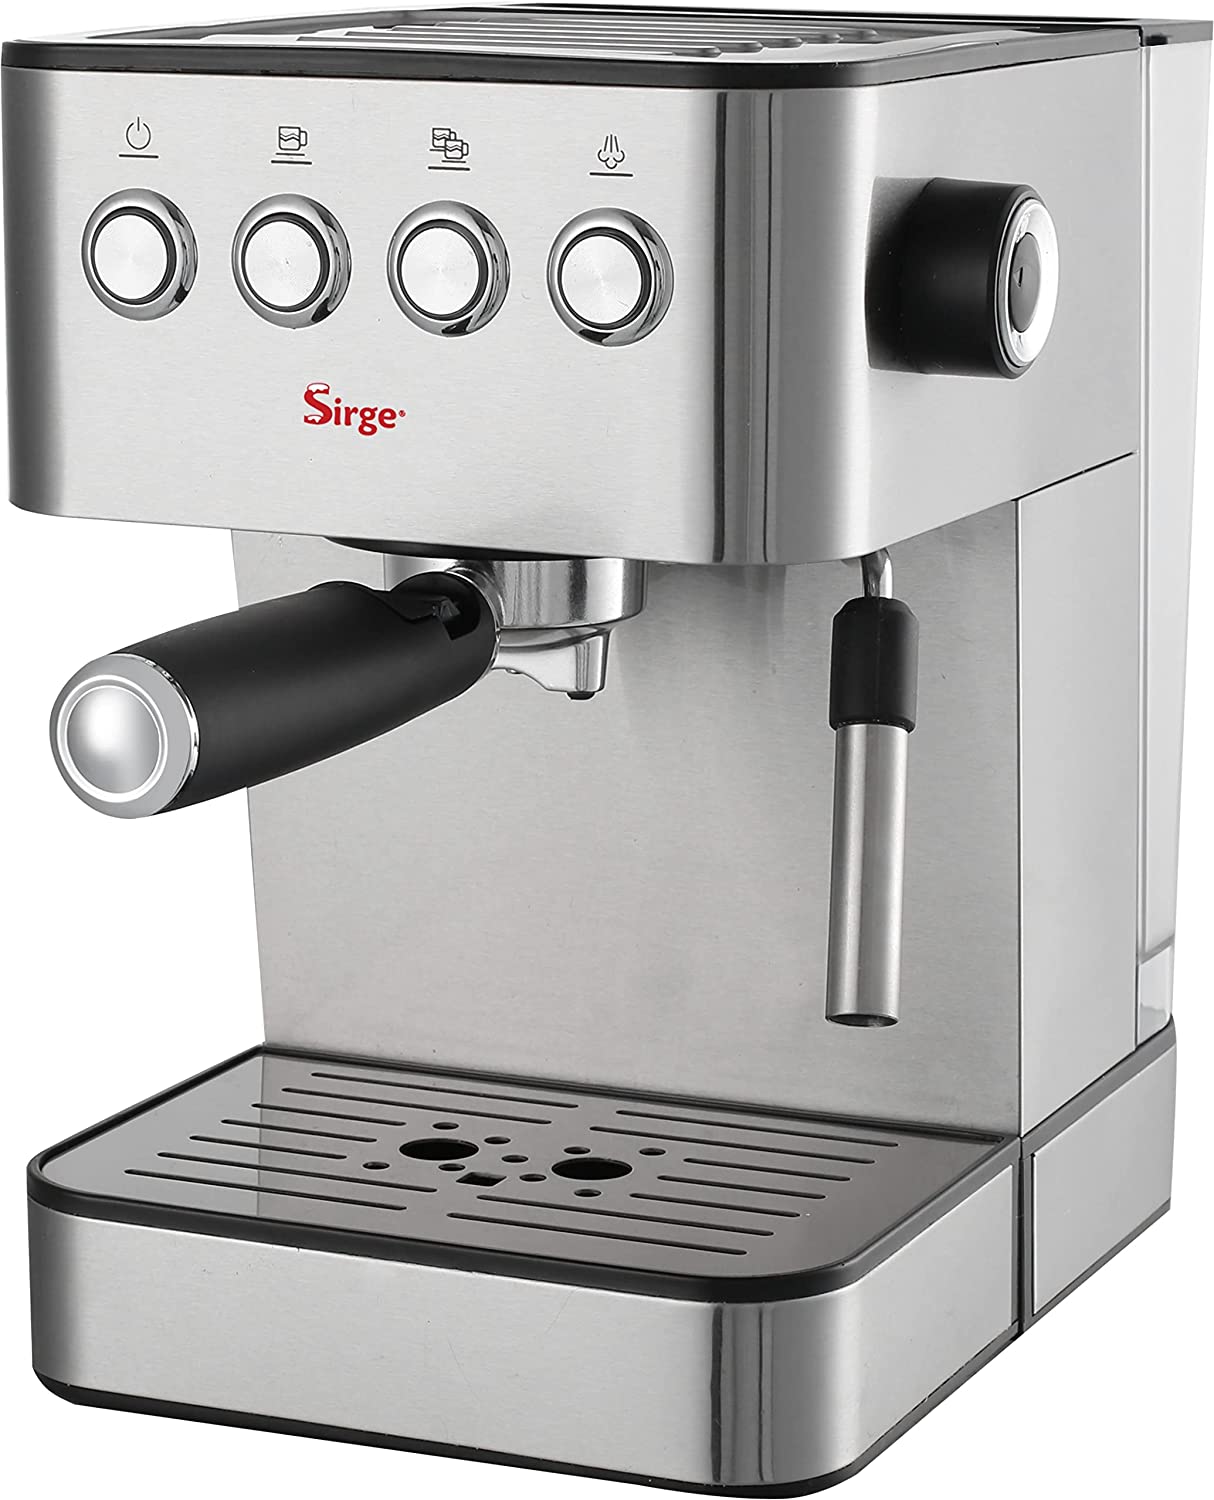 Sirge Lussy Machine for Coffee Espresso and Cappuccino Coffee in dust and Waffles Paper Lussy 15 Bar Italian Pump with 2 Filters Features Waffles And Caffe Gema Recommended. Boiler Aluminium Max 1140 Watt